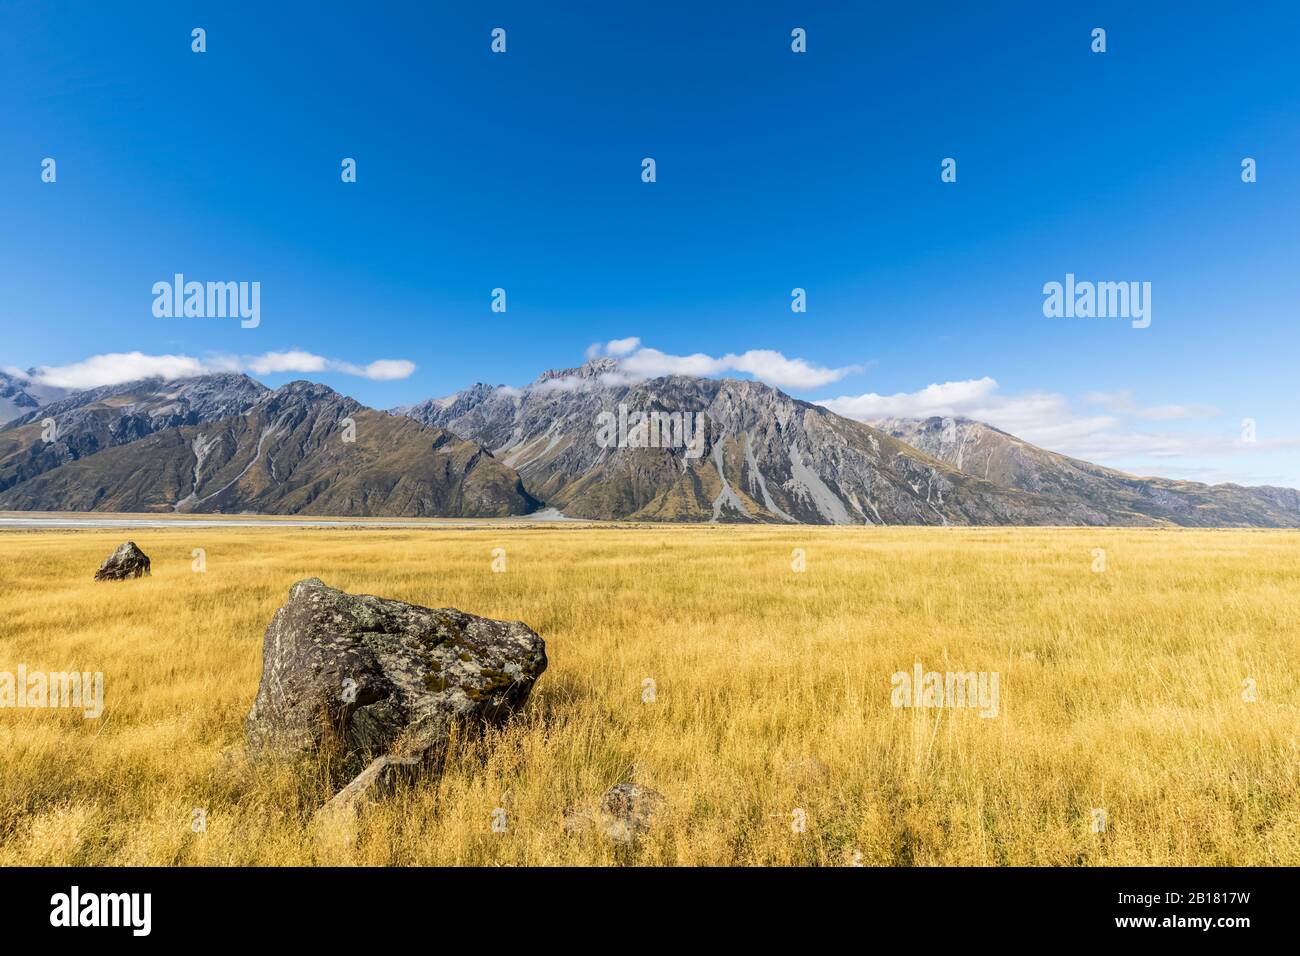 New Zealand, Oceania, South Island, Canterbury, Ben Ohau, Southern Alps (New Zealand Alps), Mount Cook National Park, Grassy field in Tasman Valley Stock Photo